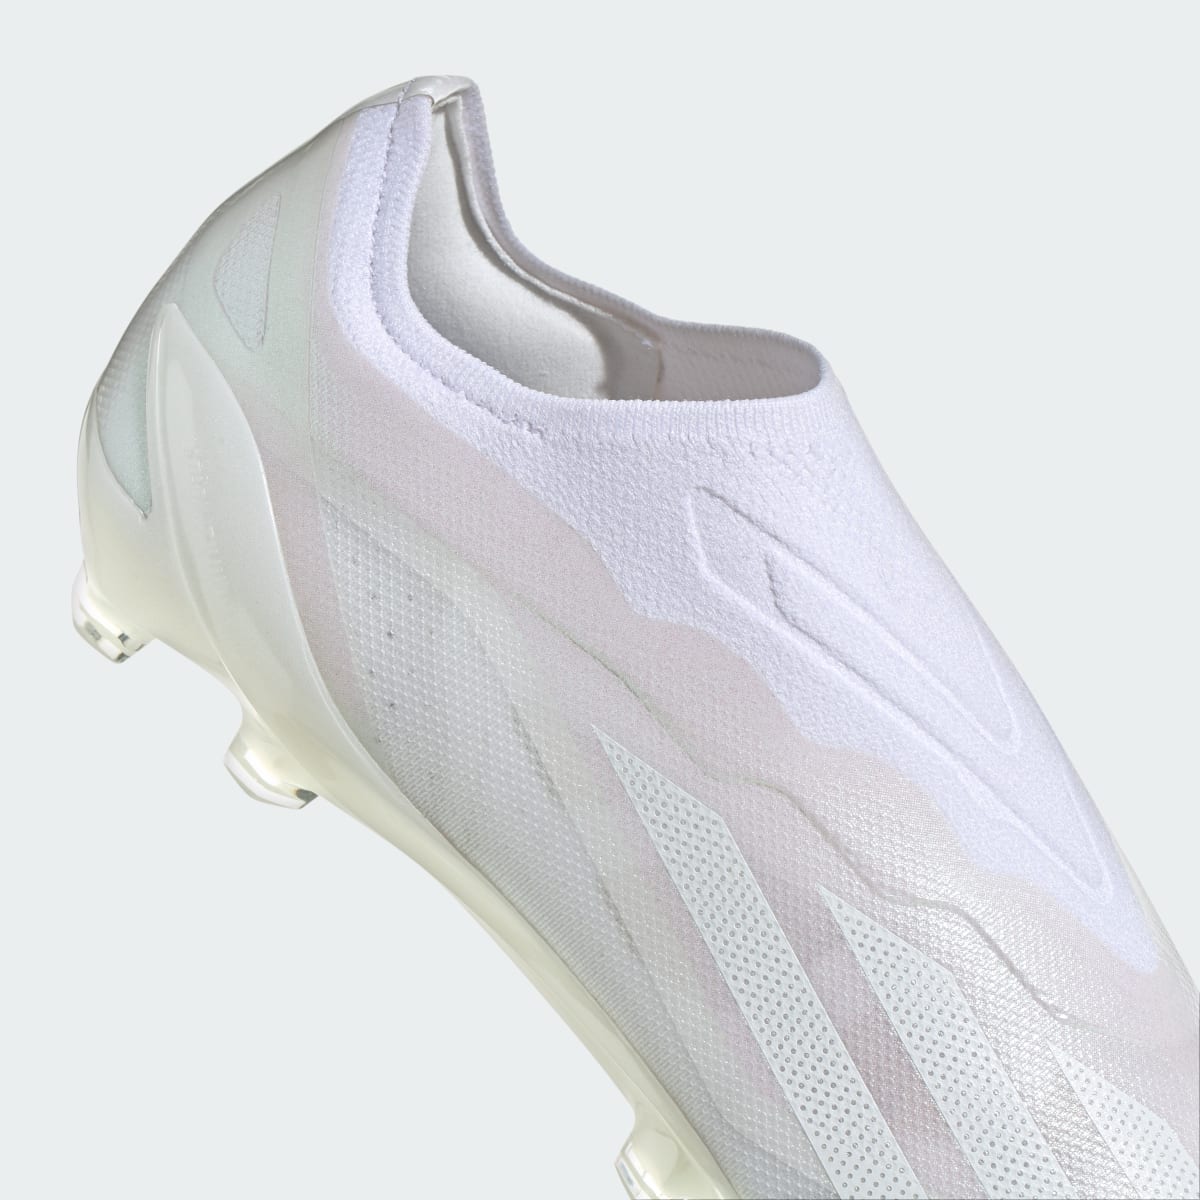 Adidas X Crazyfast.1 Laceless Firm Ground Soccer Cleats. 9